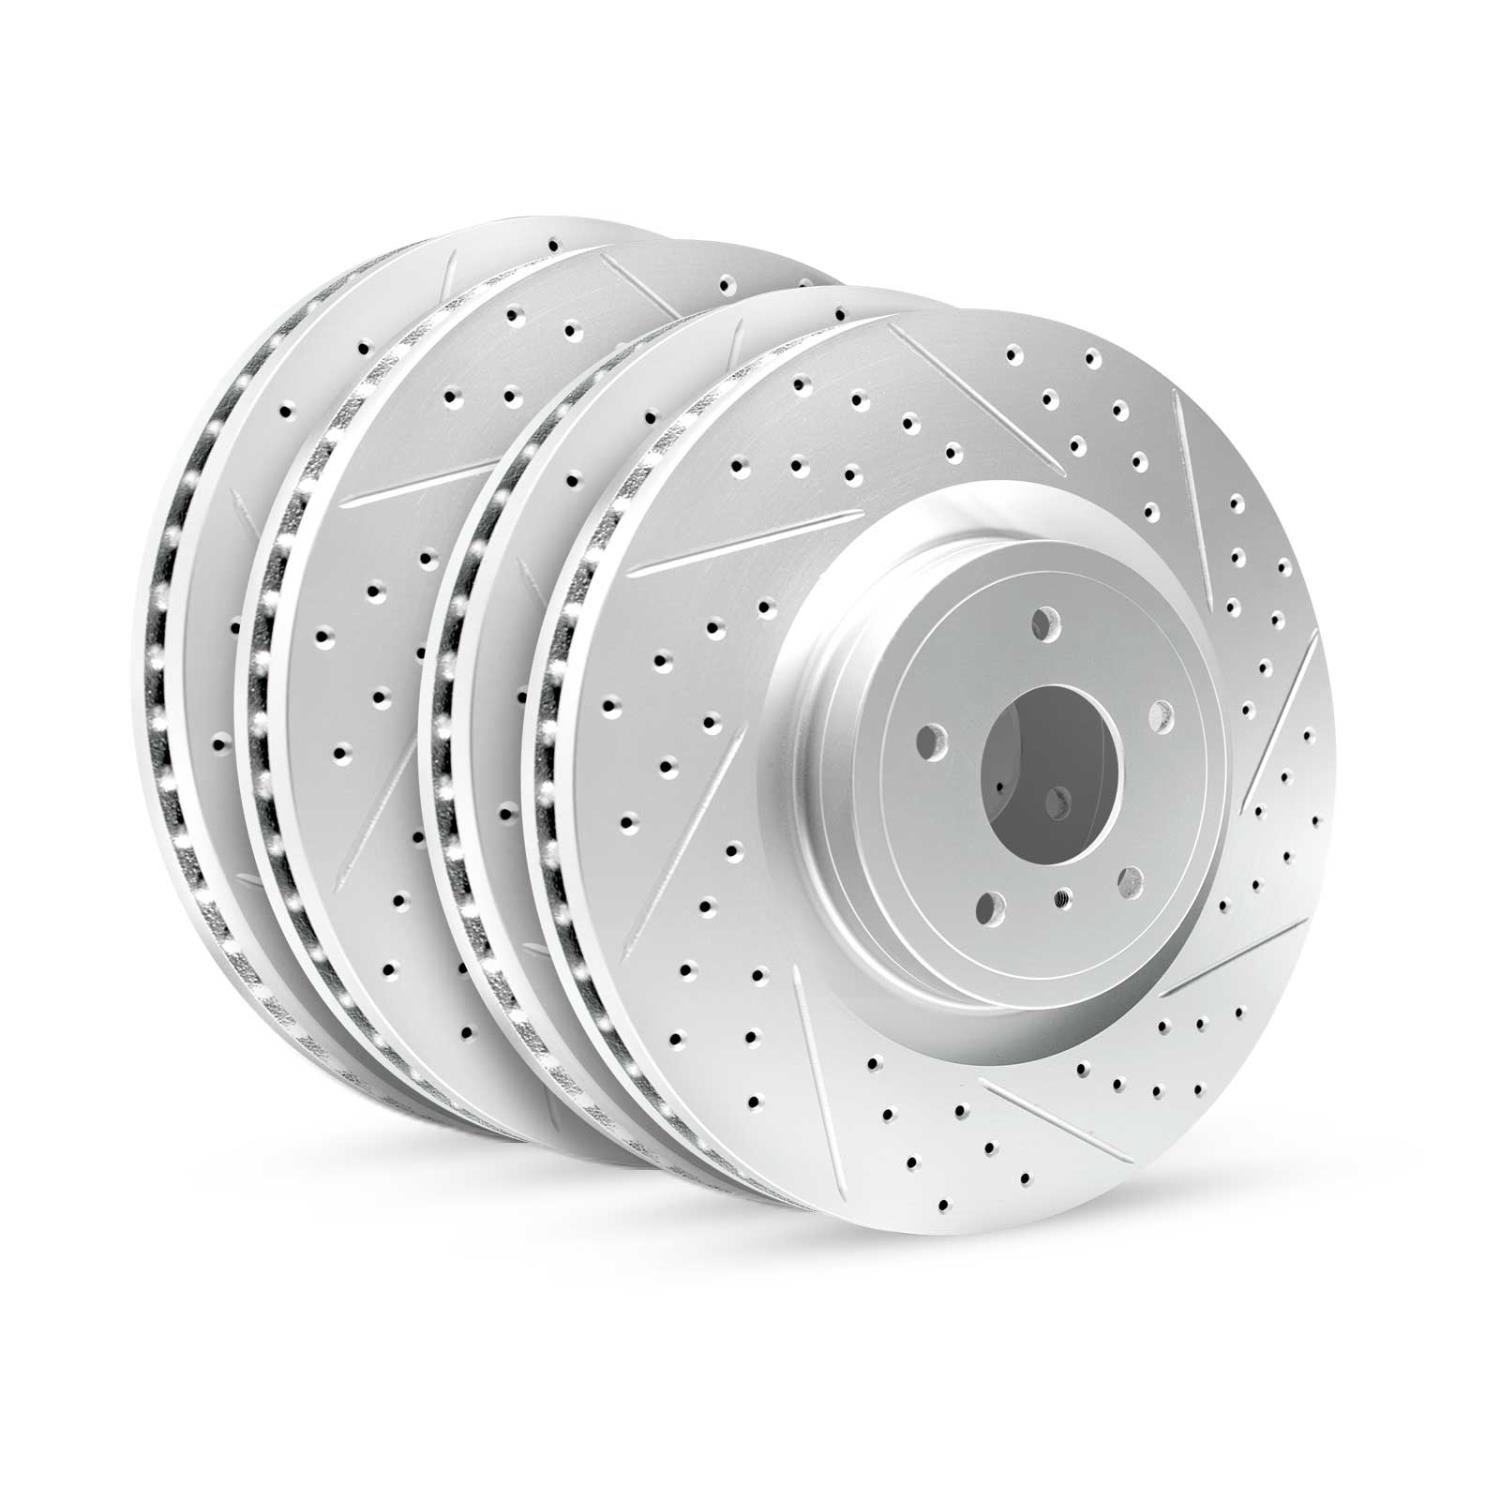 GEO-Carbon Drilled/Slotted Rotors, 2005-2007 Ford/Mazda,